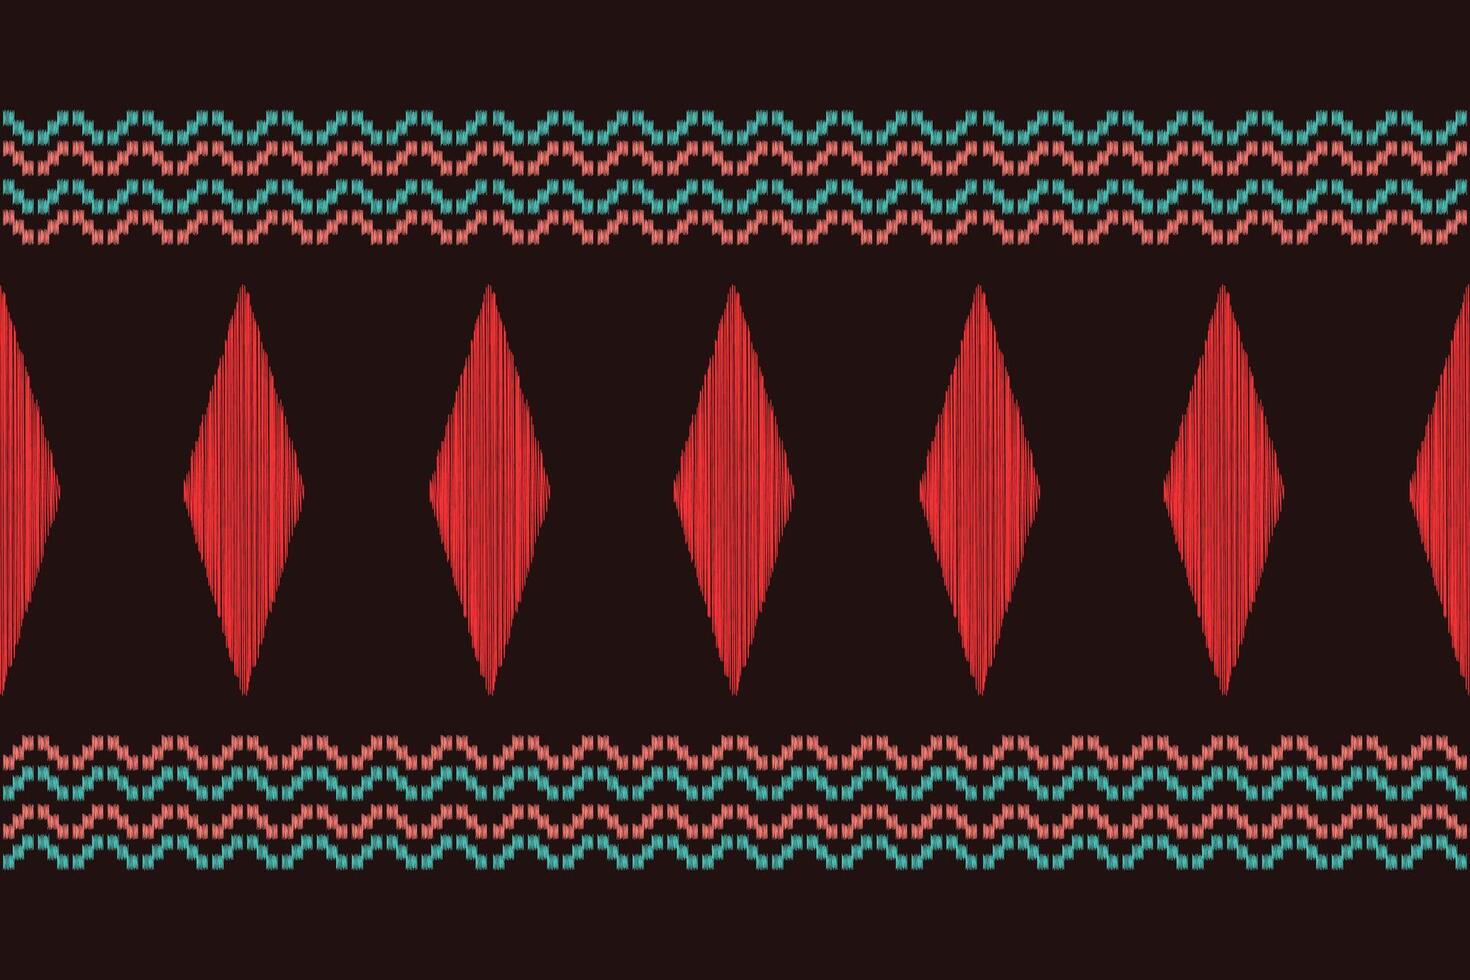 Traditional Ethnic ikat motif fabric pattern background geometric .African Ikat embroidery Ethnic oriental pattern brown background wallpaper. Abstract,,illustration.Texture,frame,decoration. vector